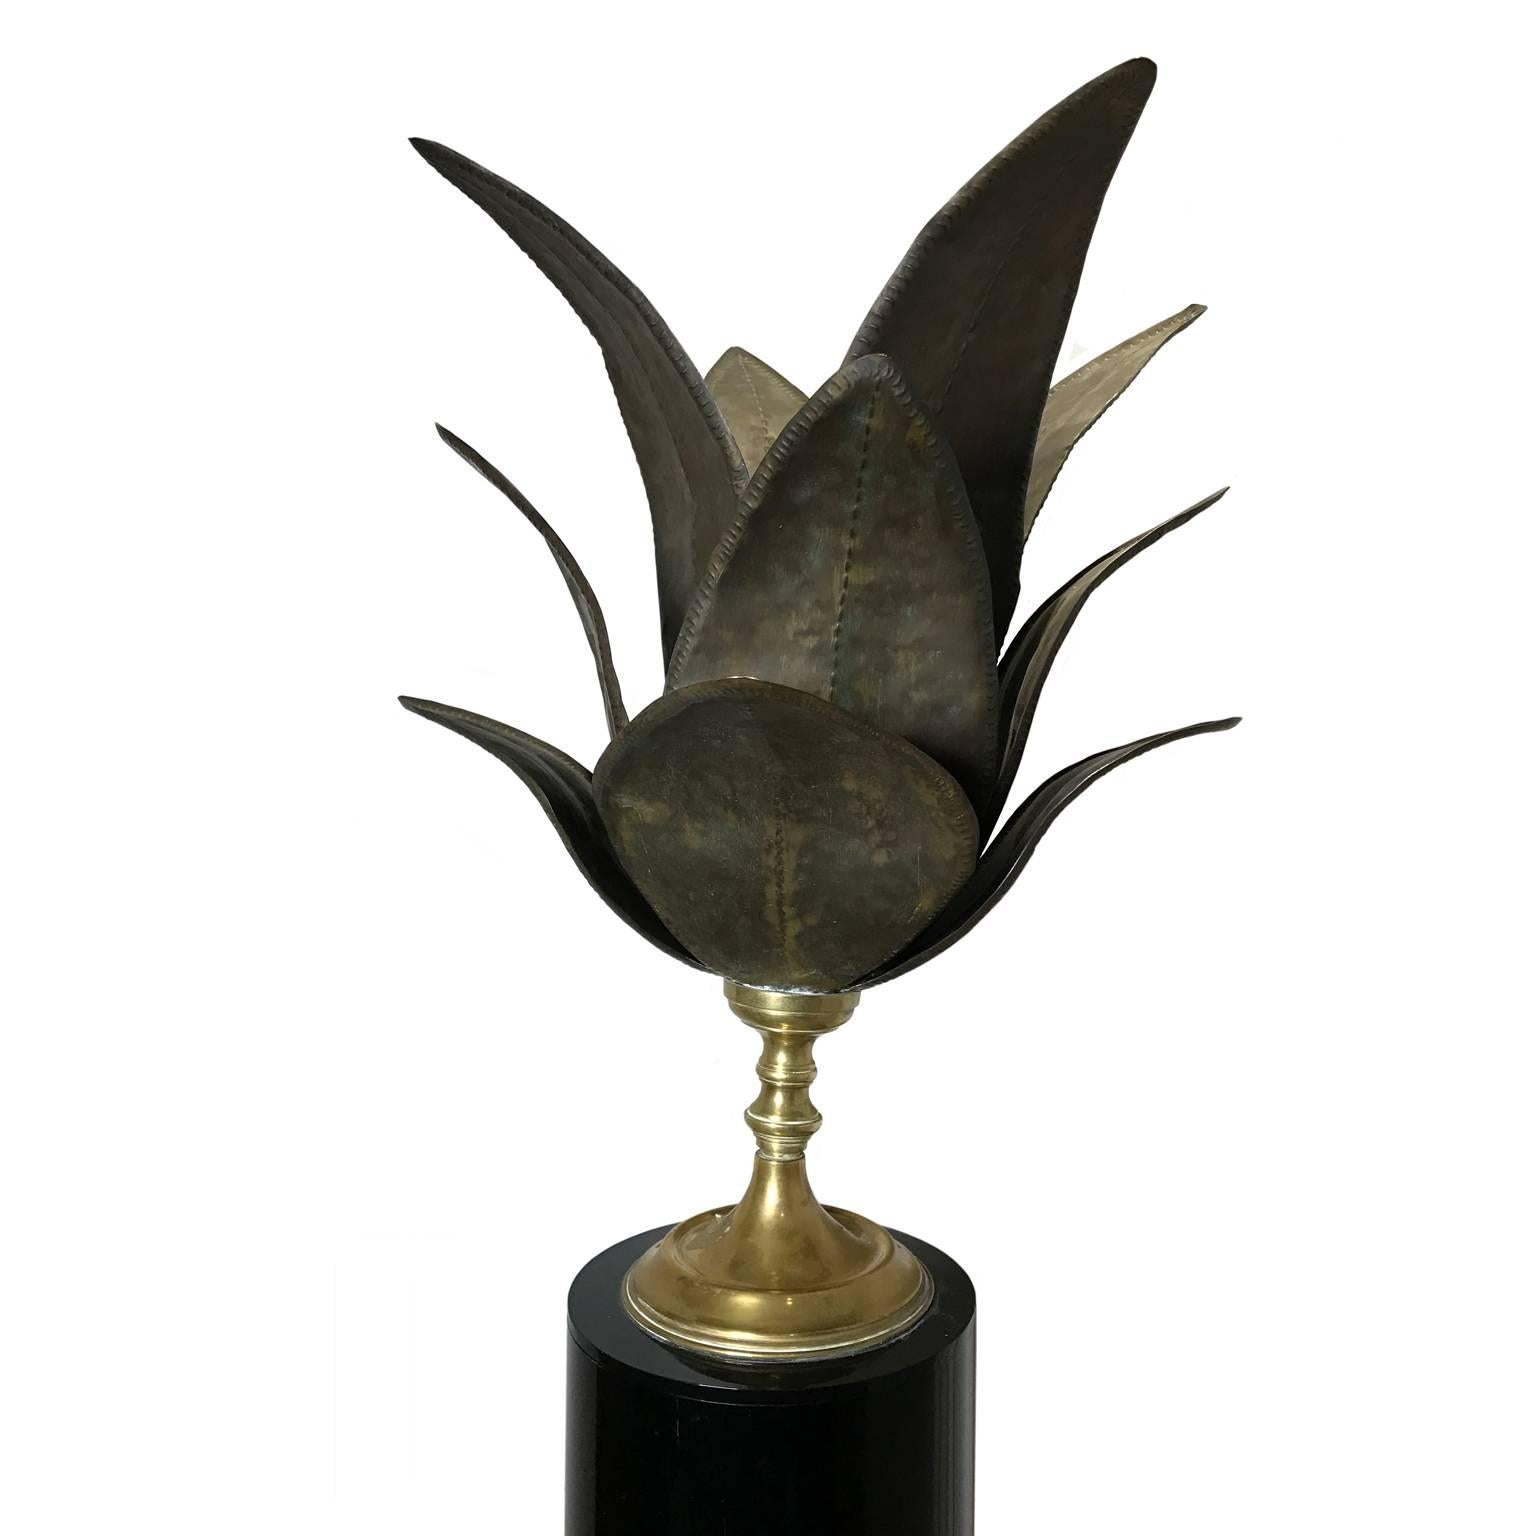 Vintage black and bronze plume floor lamp in the manner of Jansen.

Pair available, priced individually.